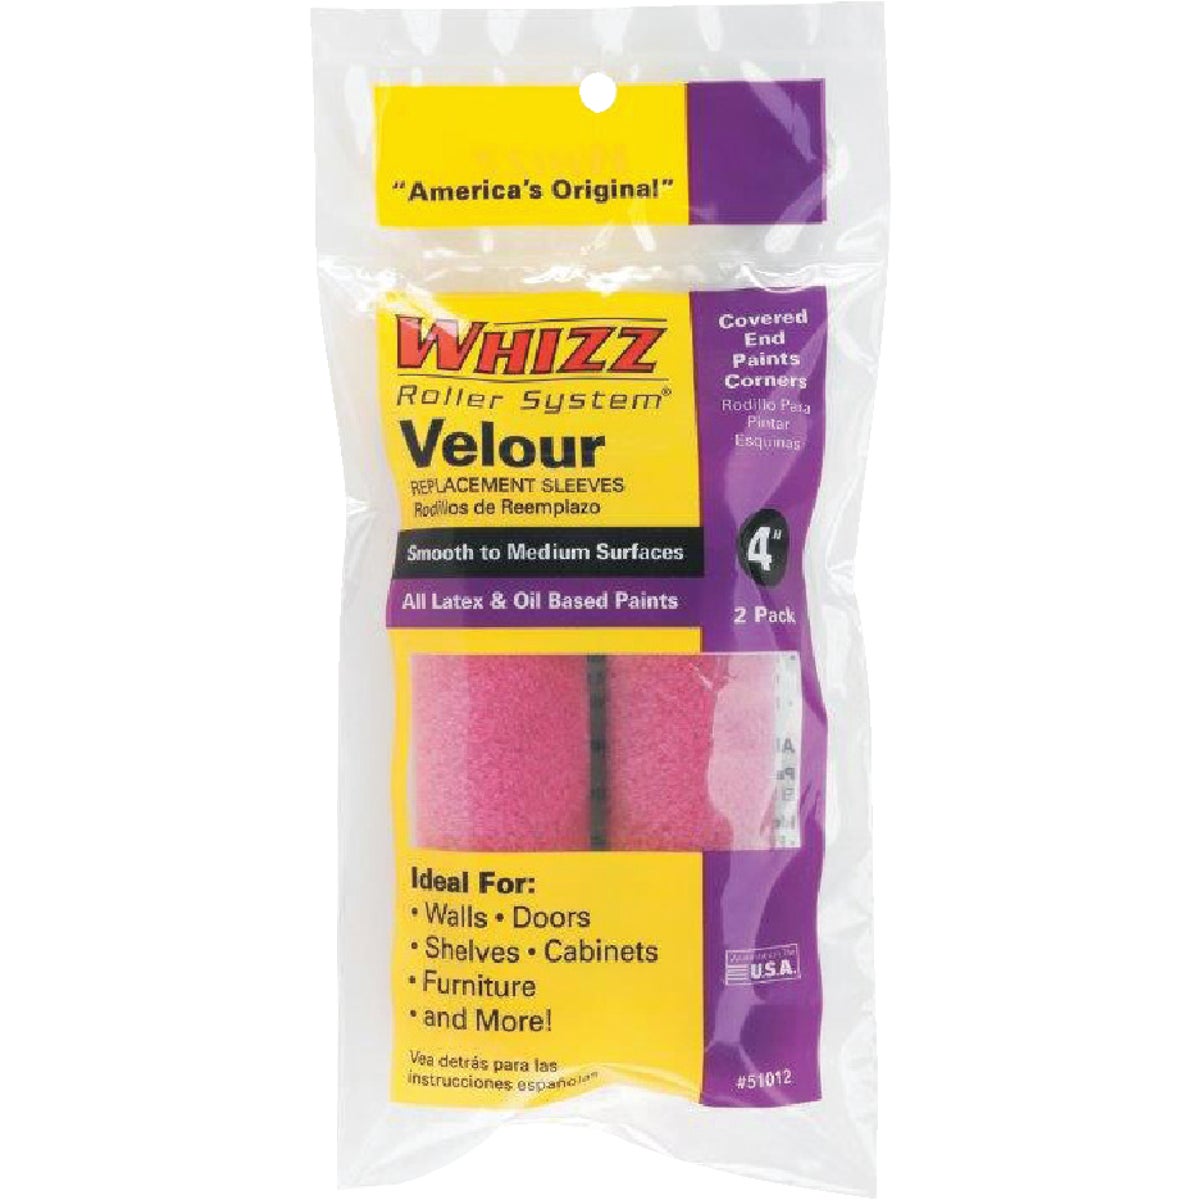 Item 771883, Velour cover can be used with all latex and oil based paints.